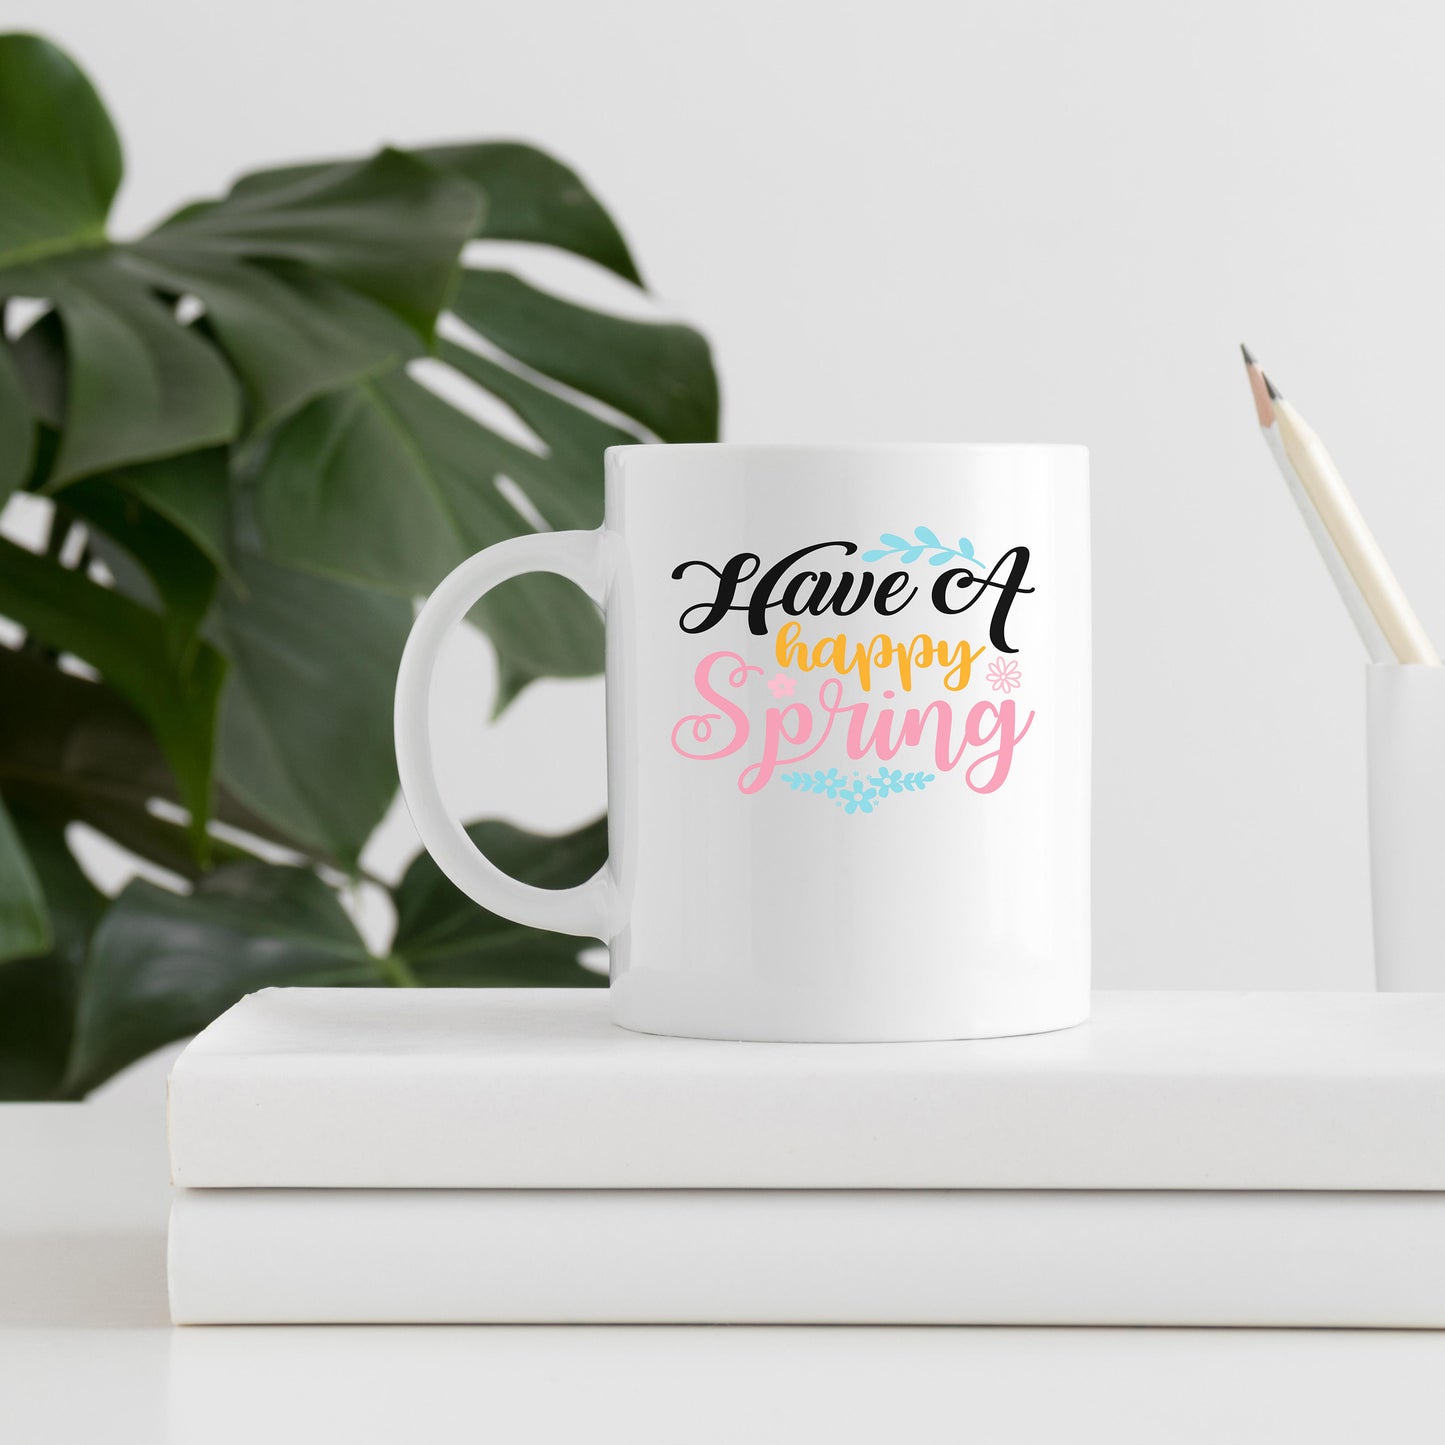 "Have A Happy Spring" Graphic